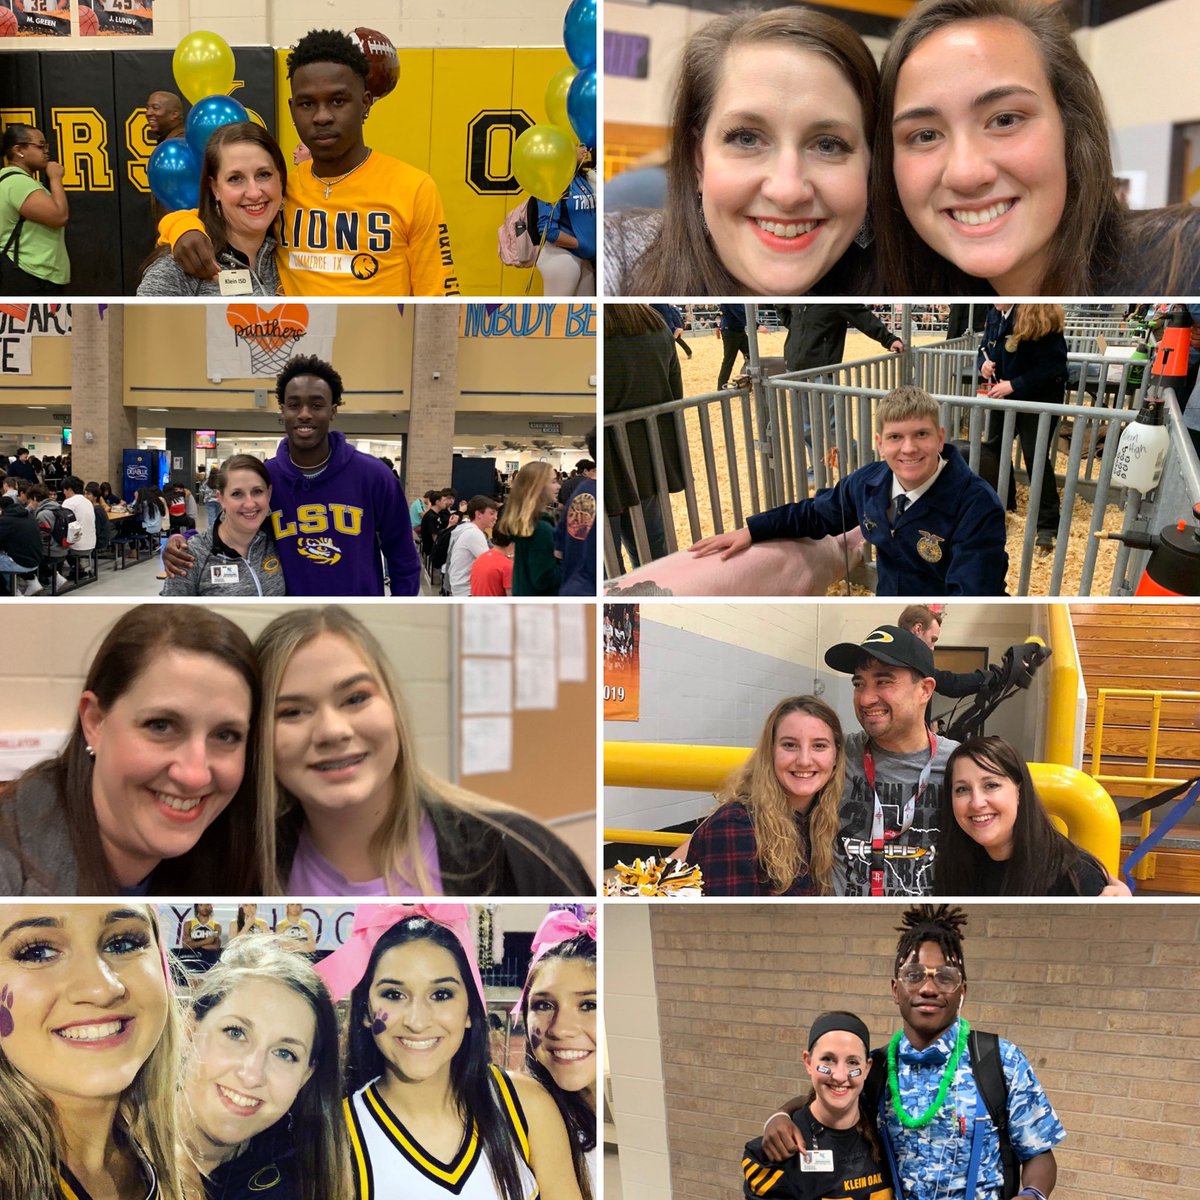 These are “my kids”.  They’re Srs and I will miss them so. It may not always be an easy job but I do it for them. I am such a #proudassistantprincipal #oakem #allin #kleinfamily #ClassOf2020 #heartisfull